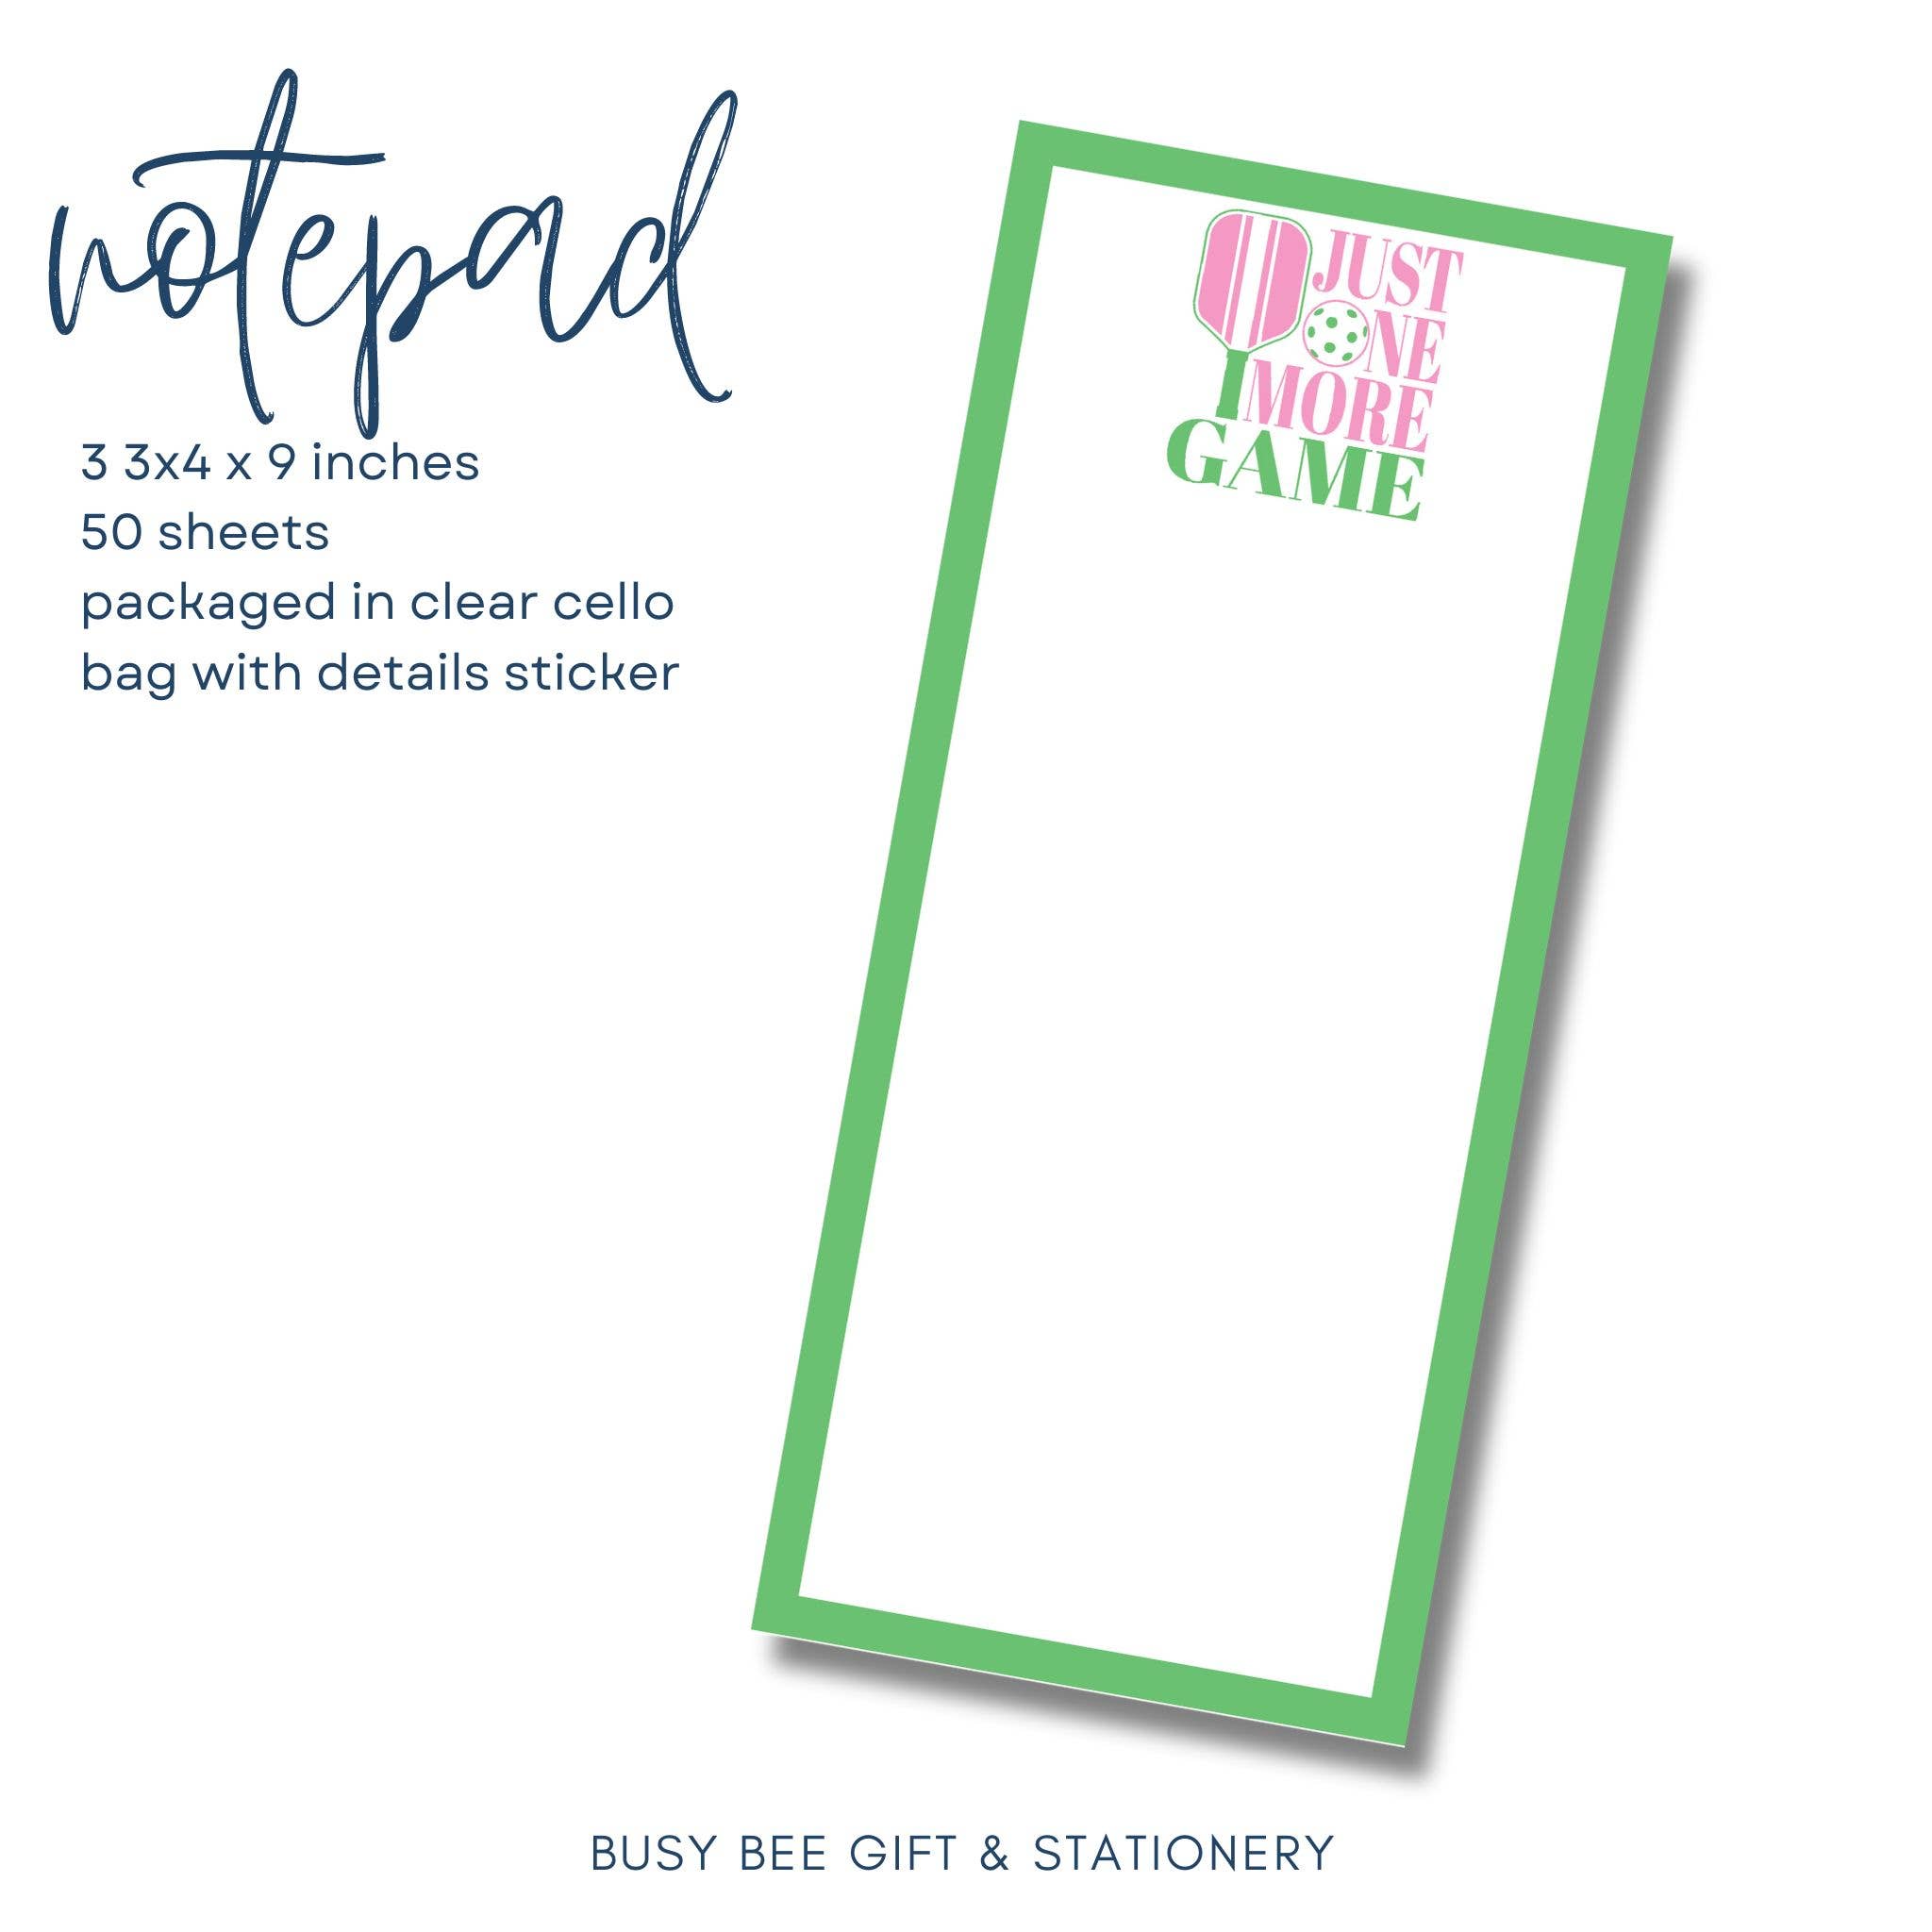 Busy Bee Gift & Stationery - Pickle Ball Notepad 3.75x9 Inches